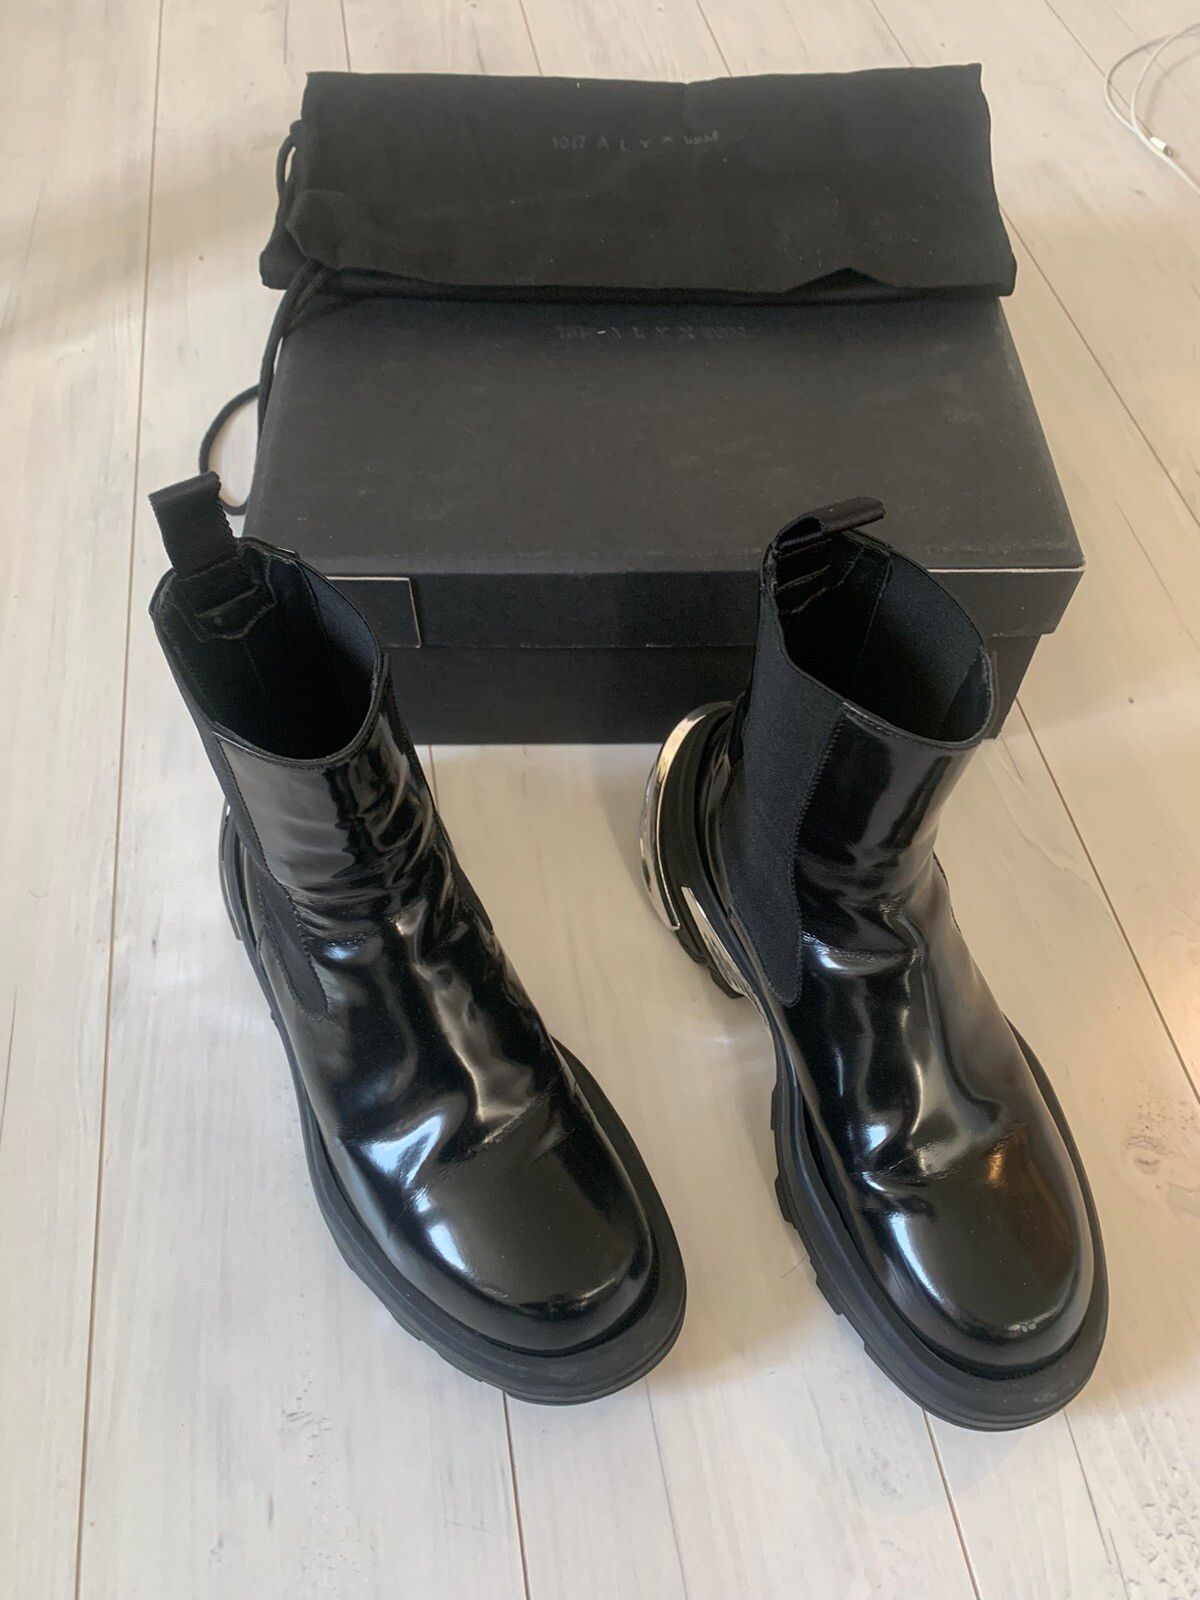 Alyx Alyx Chelsea boots removable sole | Grailed